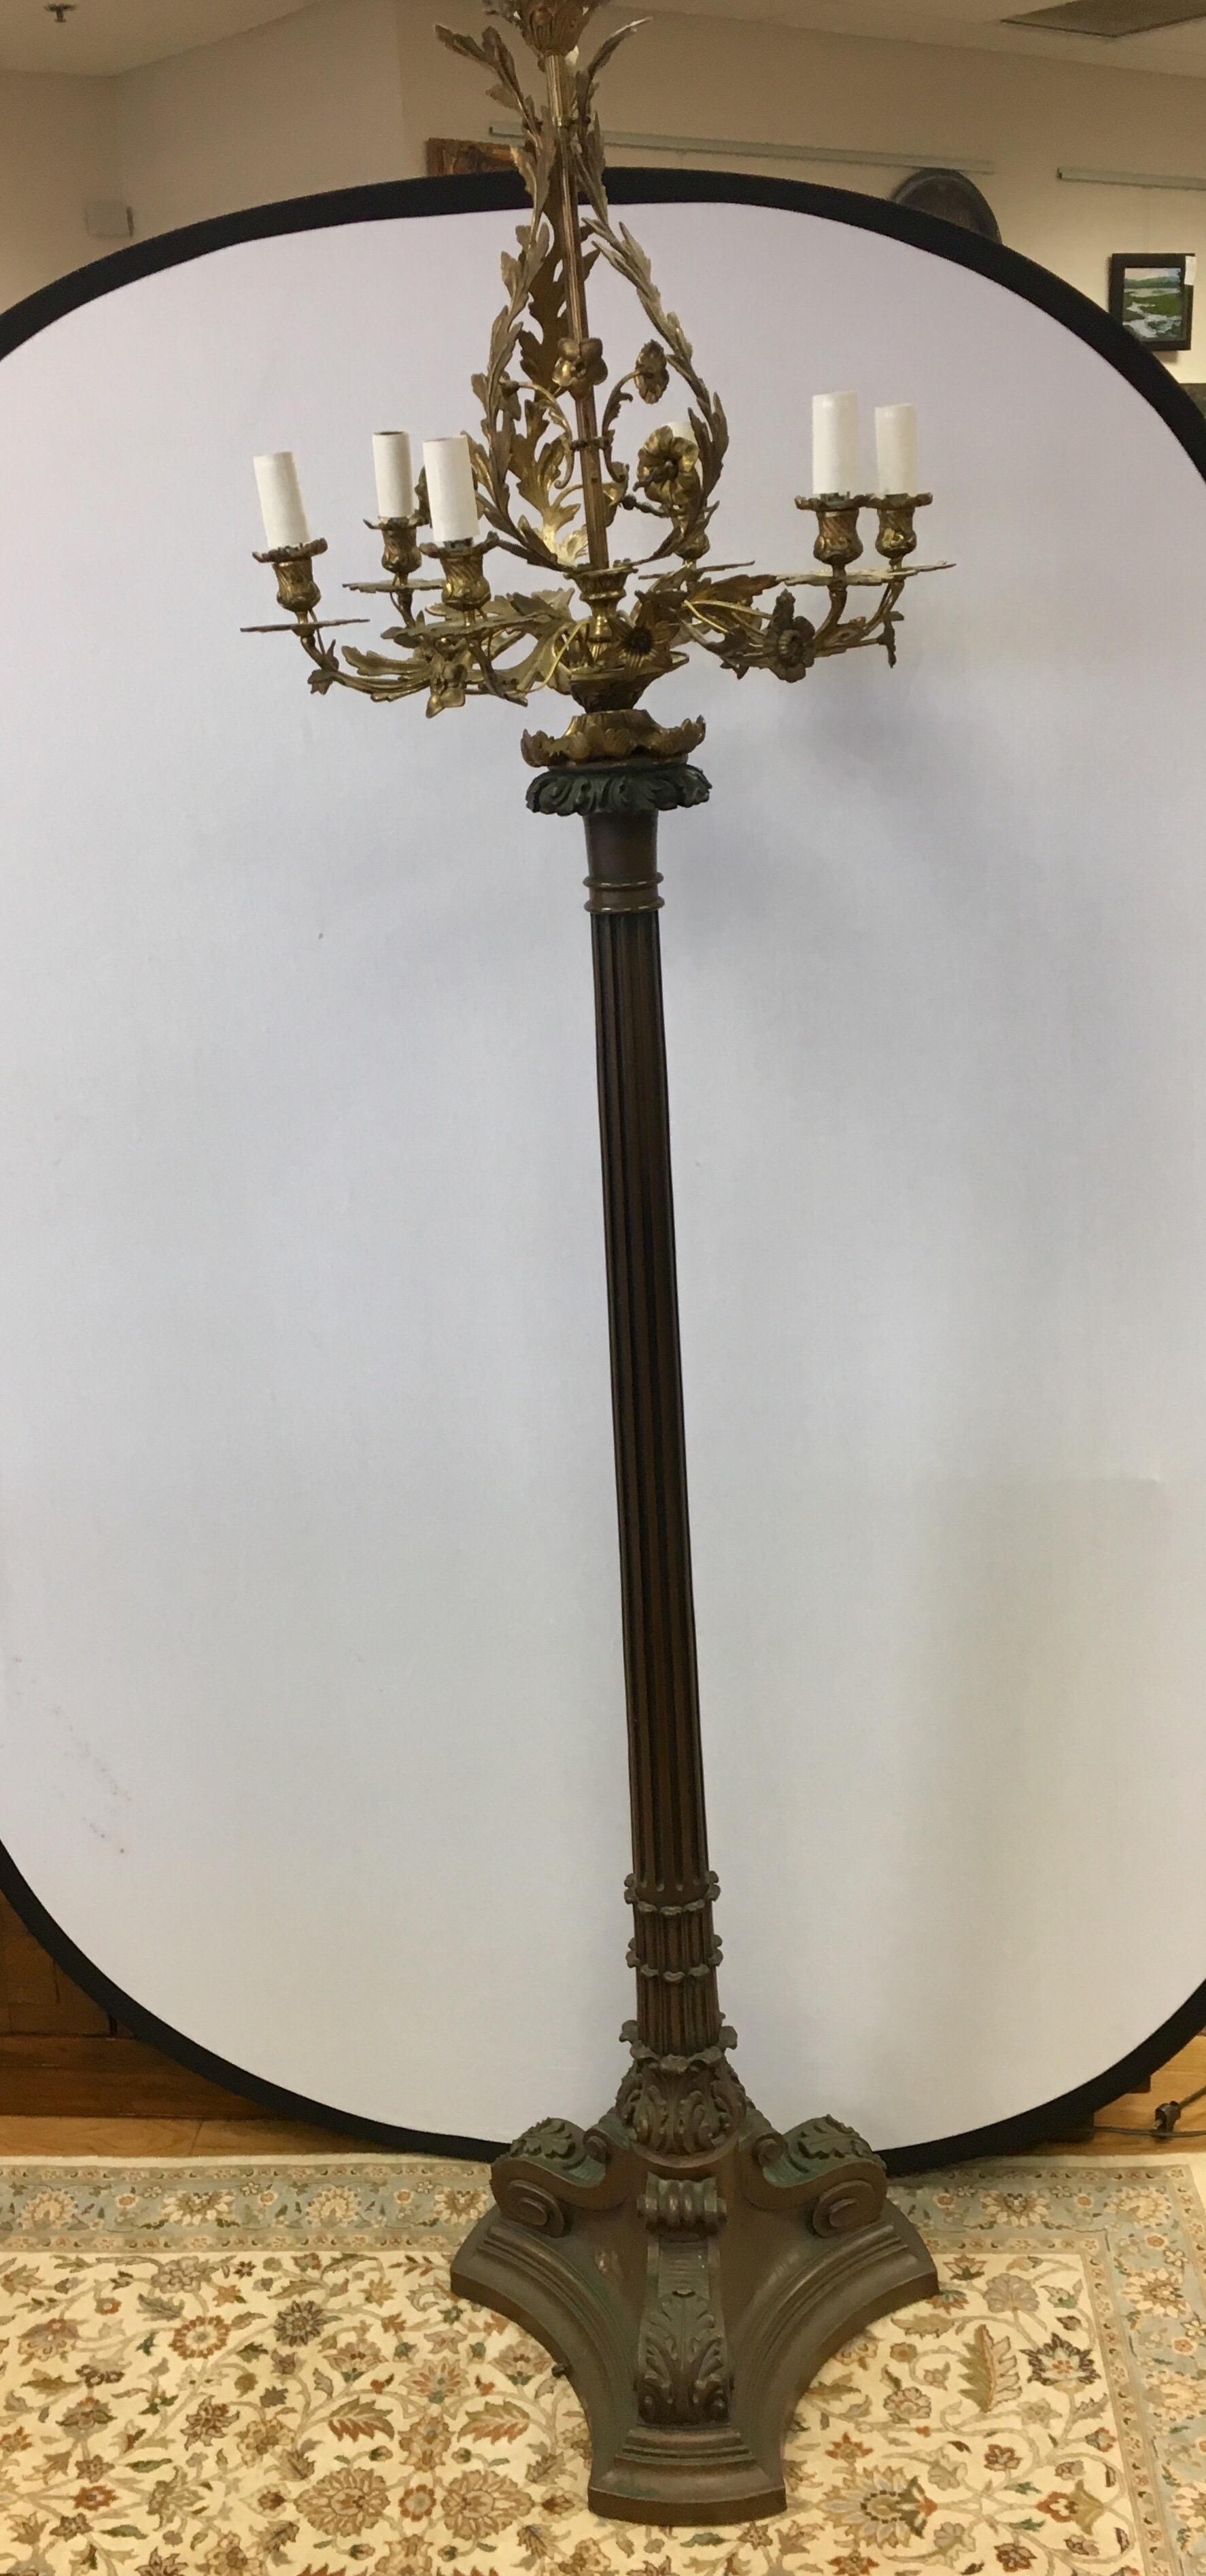 A stunning bronze chandelier was attached to a floor lamp and, voila, this neoclassical candelabra floor lamp was born. Turn of century and circa New England.